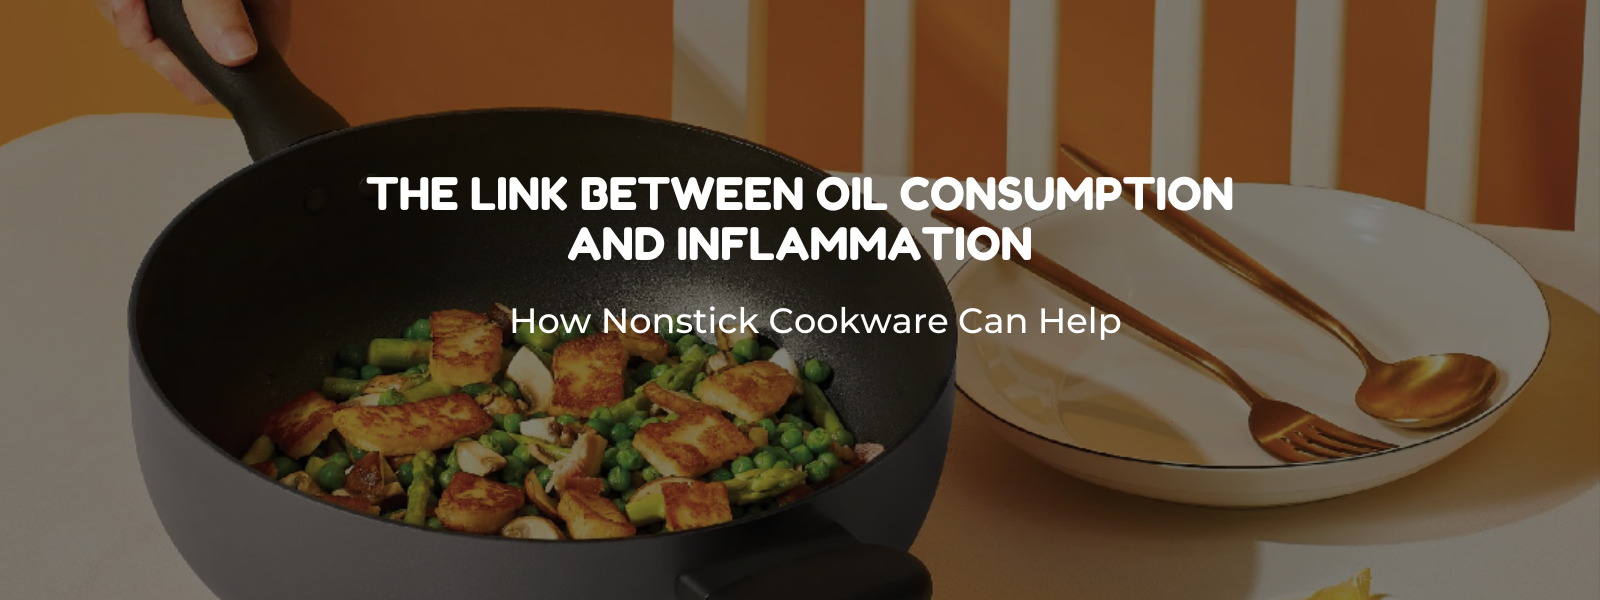 The Link Between Oil Consumption and Inflammation: How Nonstick Cookware Can Help